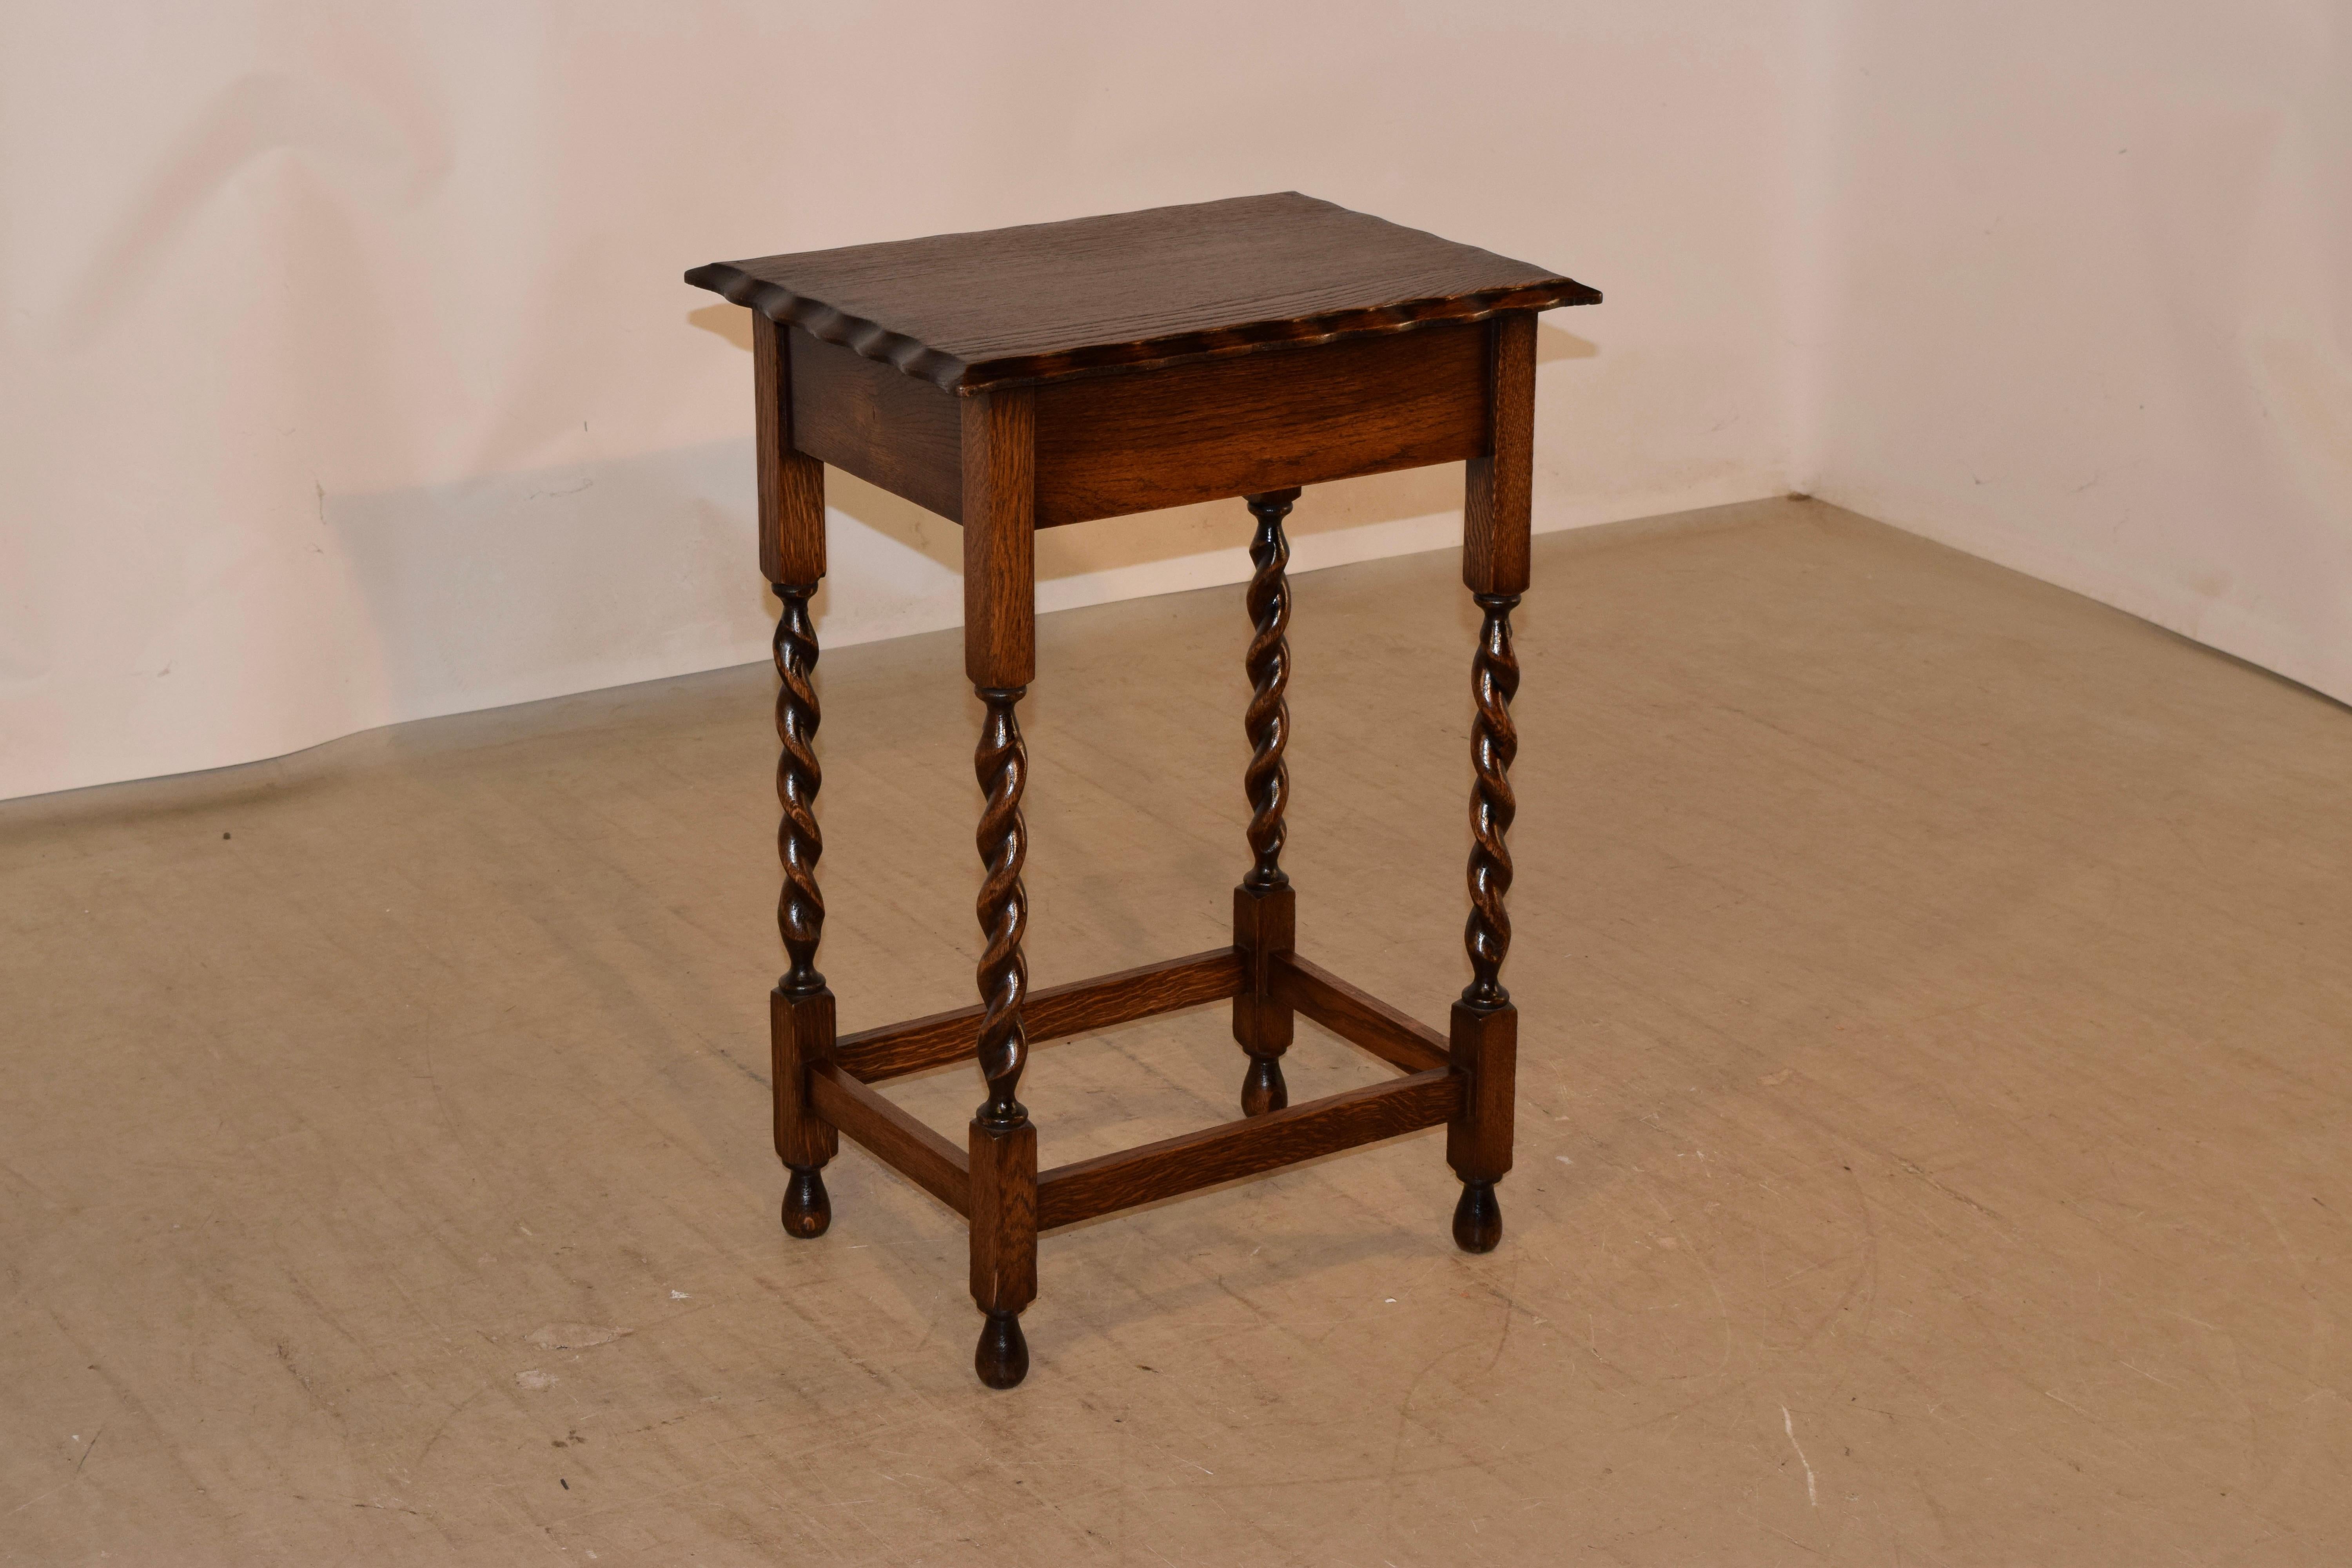 Circa 1900 Edwardian oak side table from England with a beveled and scalloped edge around the top, following down to a simple apron and supported on hand turned barley twist legs, joined by simple stretchers and raised on hand turned feet.